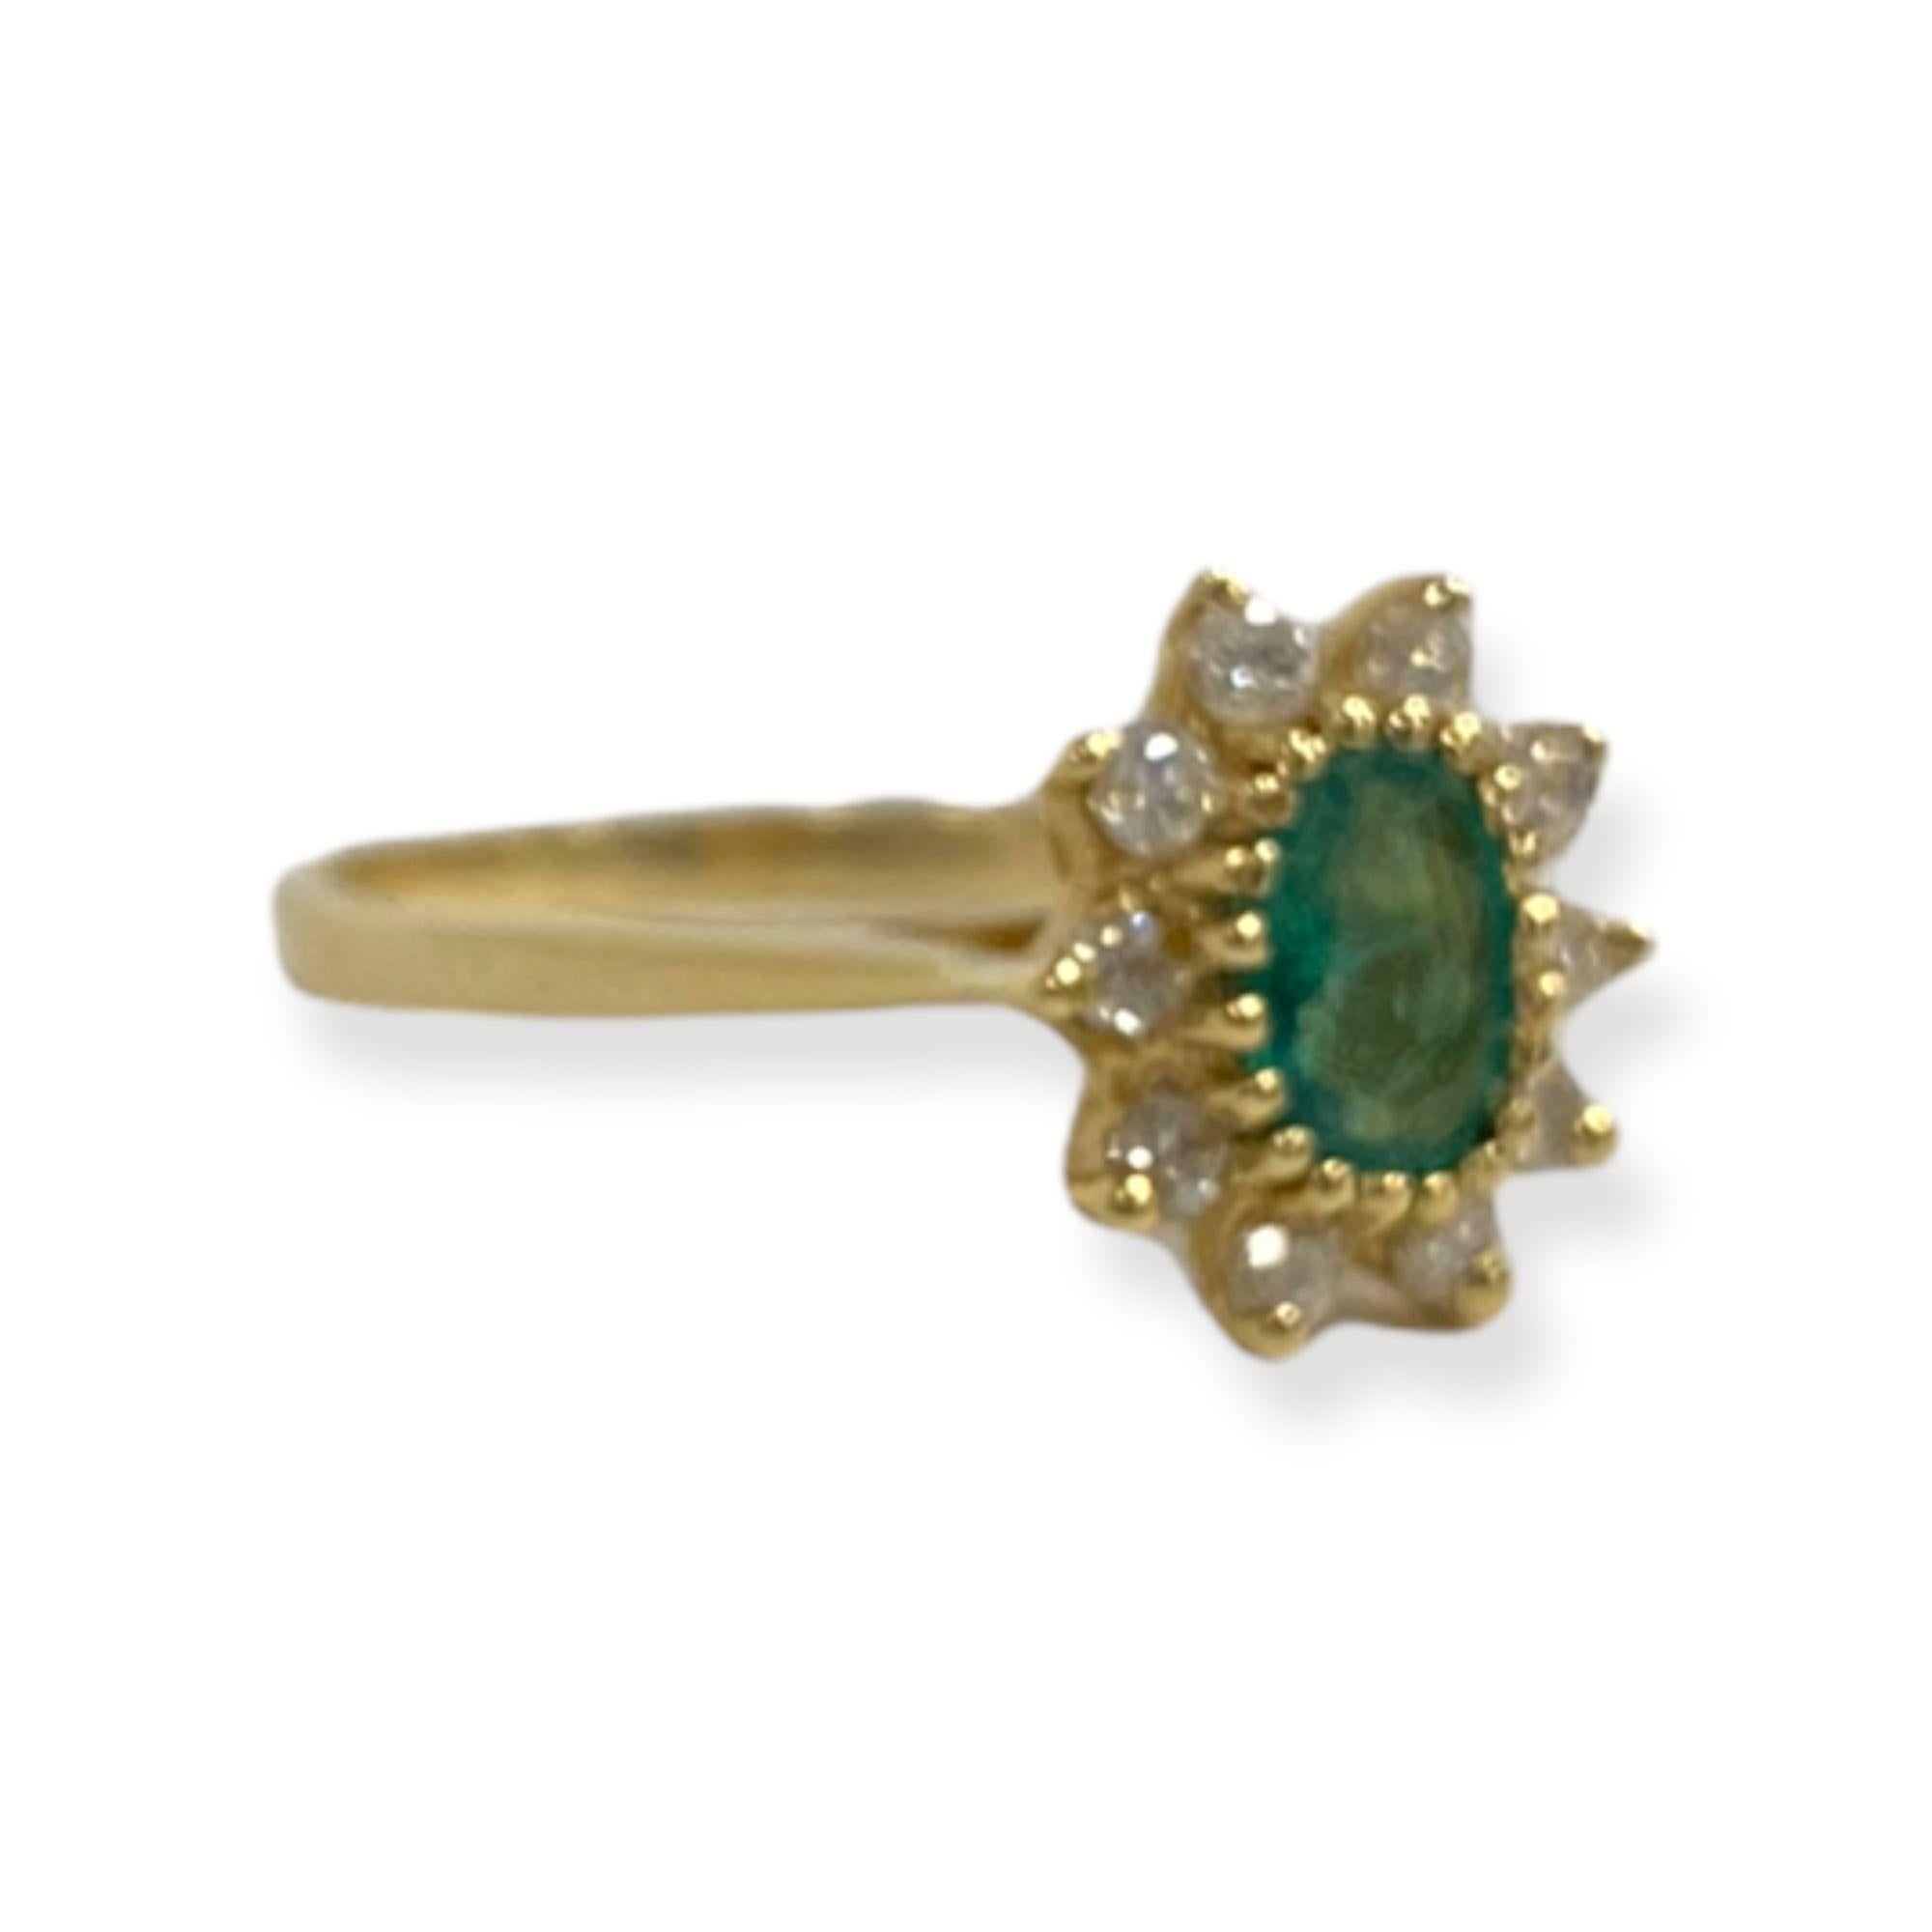 This spectacular ring from the Suzy Levian collection features 14k gold. An array of white diamonds (.15cttw) accent the perfect green color of the emerald gemstone center stone (.75ct) The brilliance of these gems and the luster of the high-polish